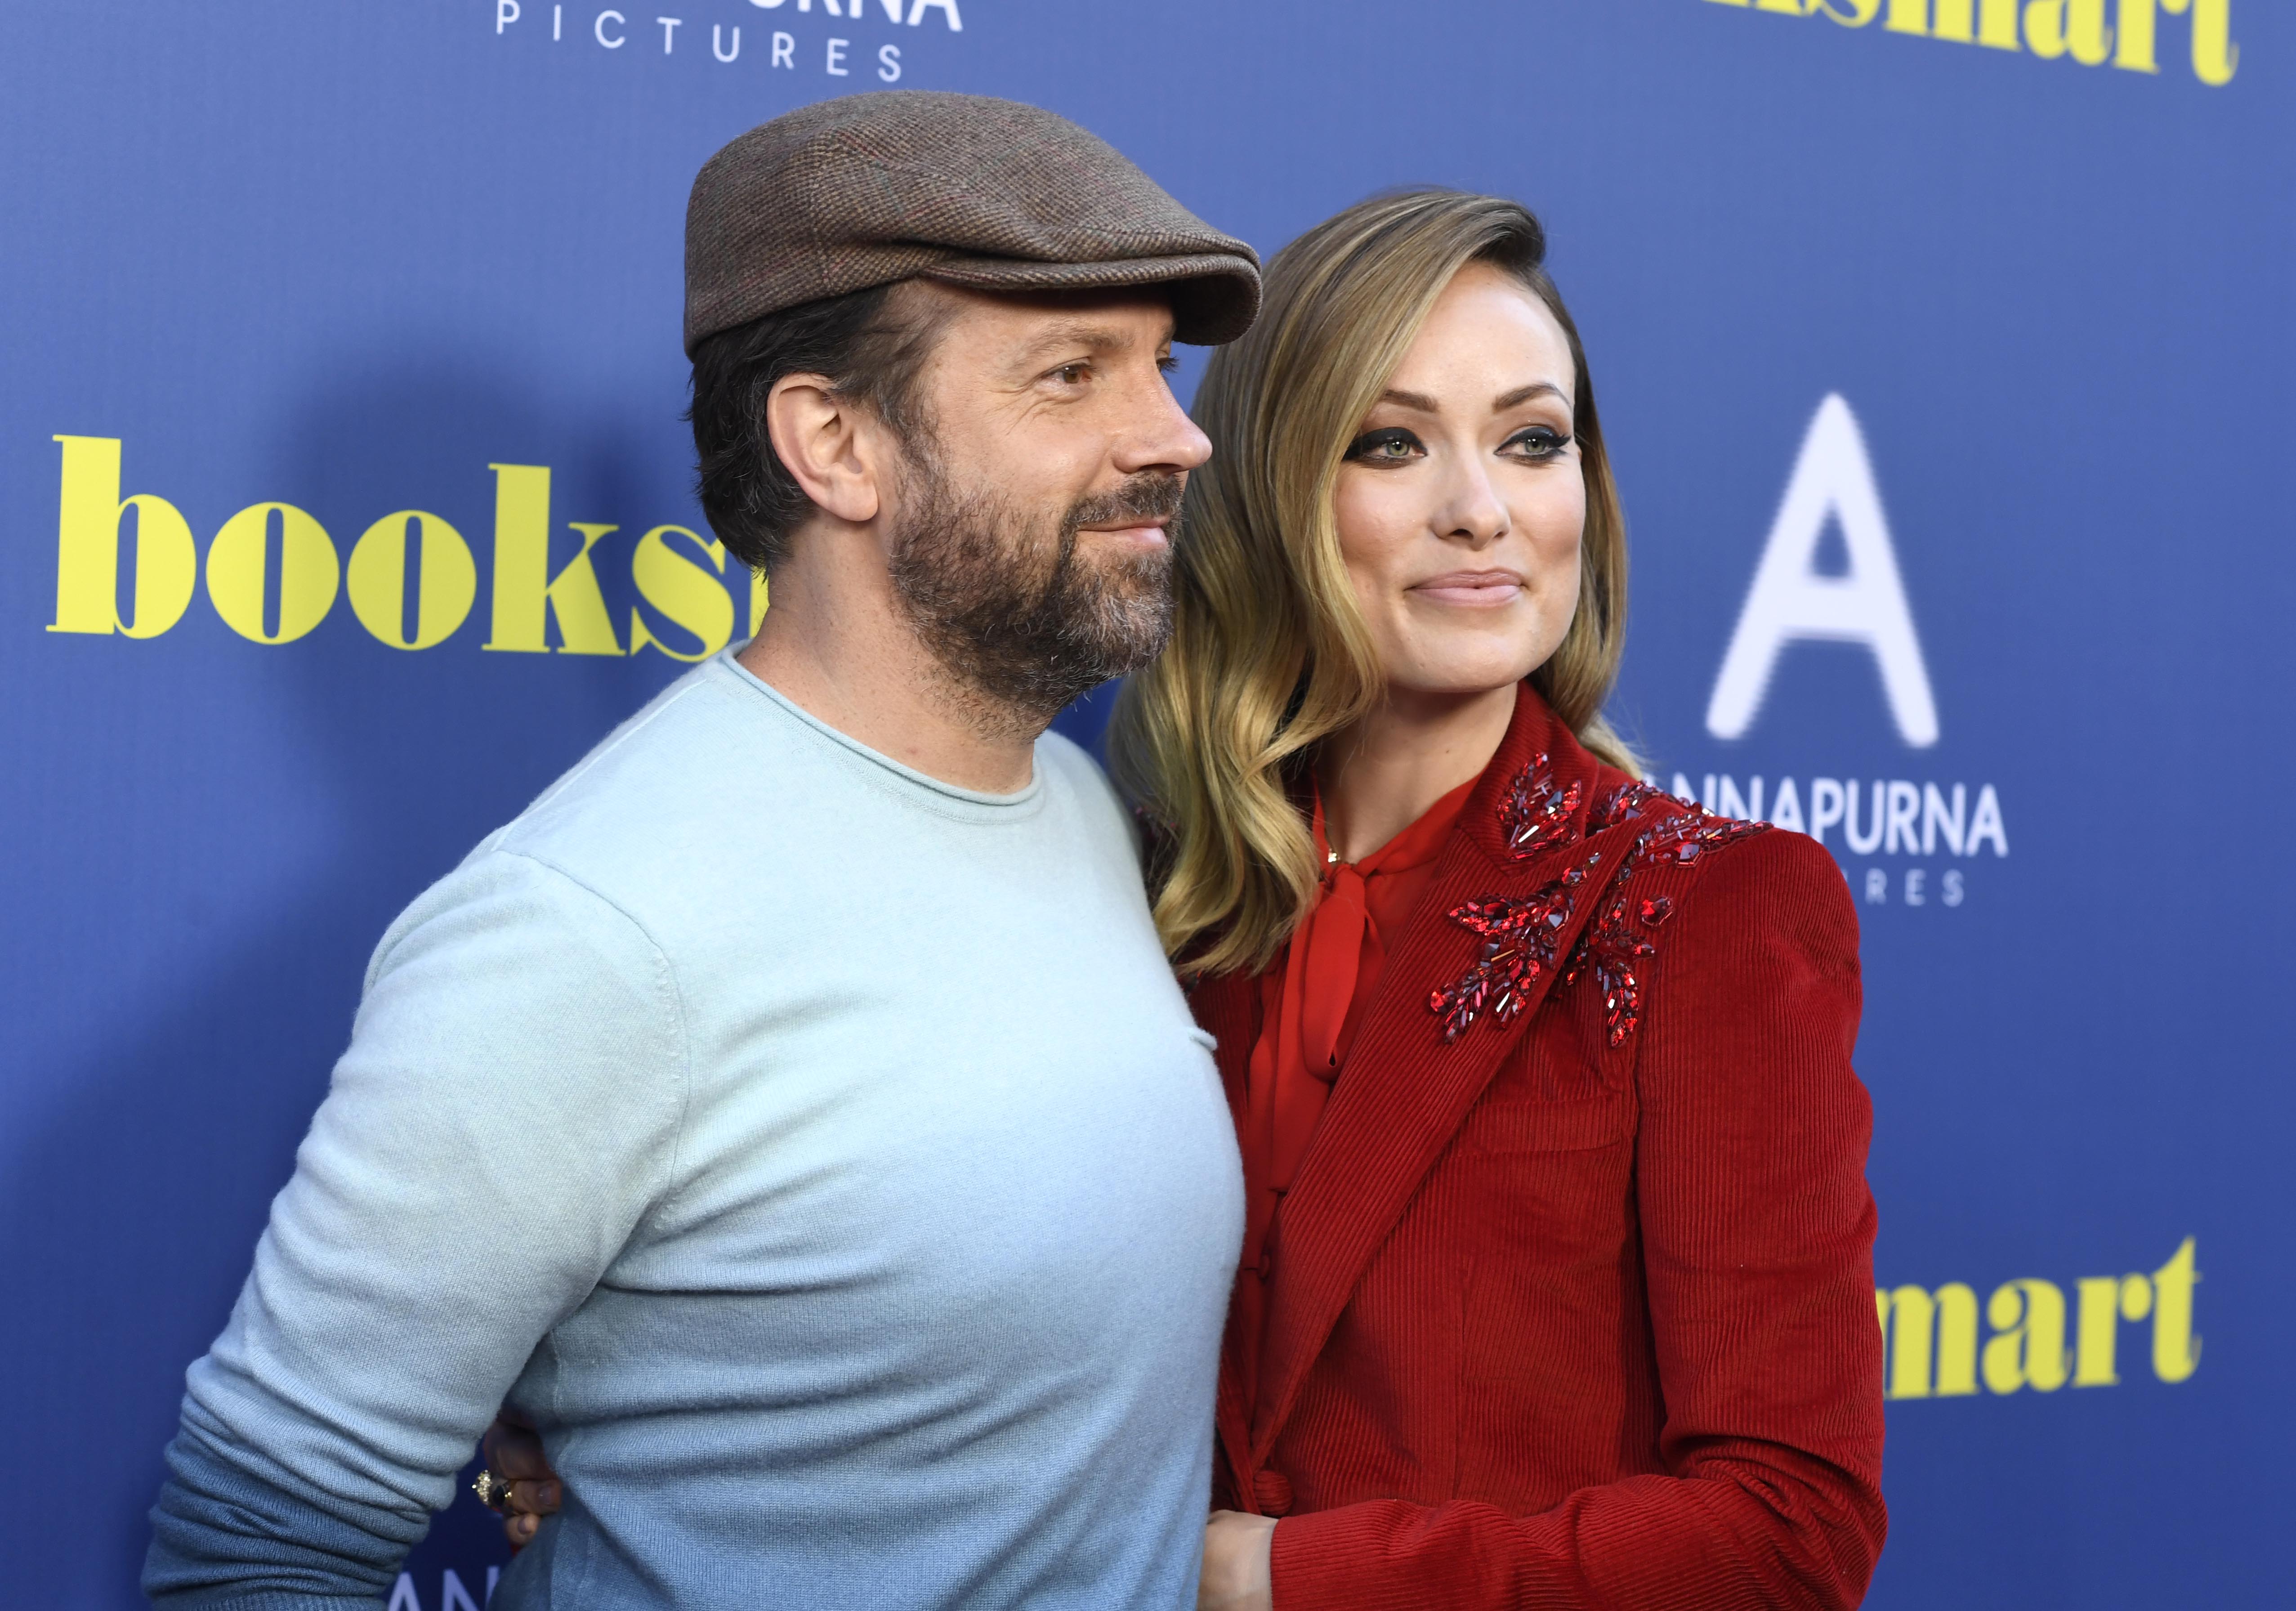 Olivia Wilde and Jason Sudeikis at the screening of "Booksmart", which Wilde directed,  in Los Angeles on May 13, 2019. | Photo: Getty Images. 